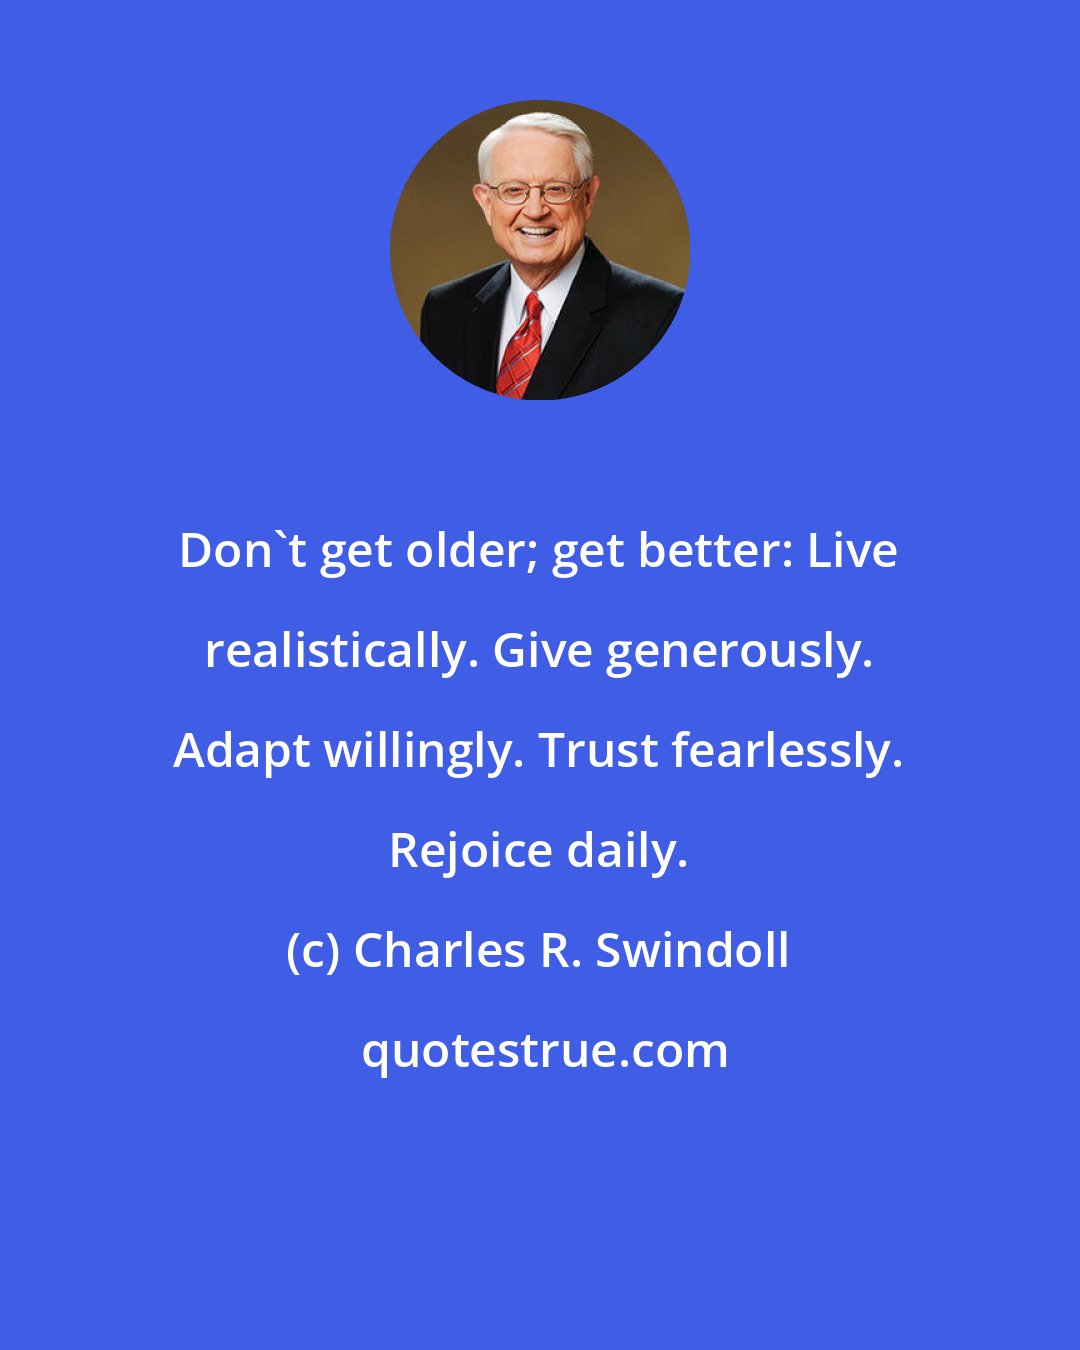 Charles R. Swindoll: Don't get older; get better: Live realistically. Give generously. Adapt willingly. Trust fearlessly. Rejoice daily.